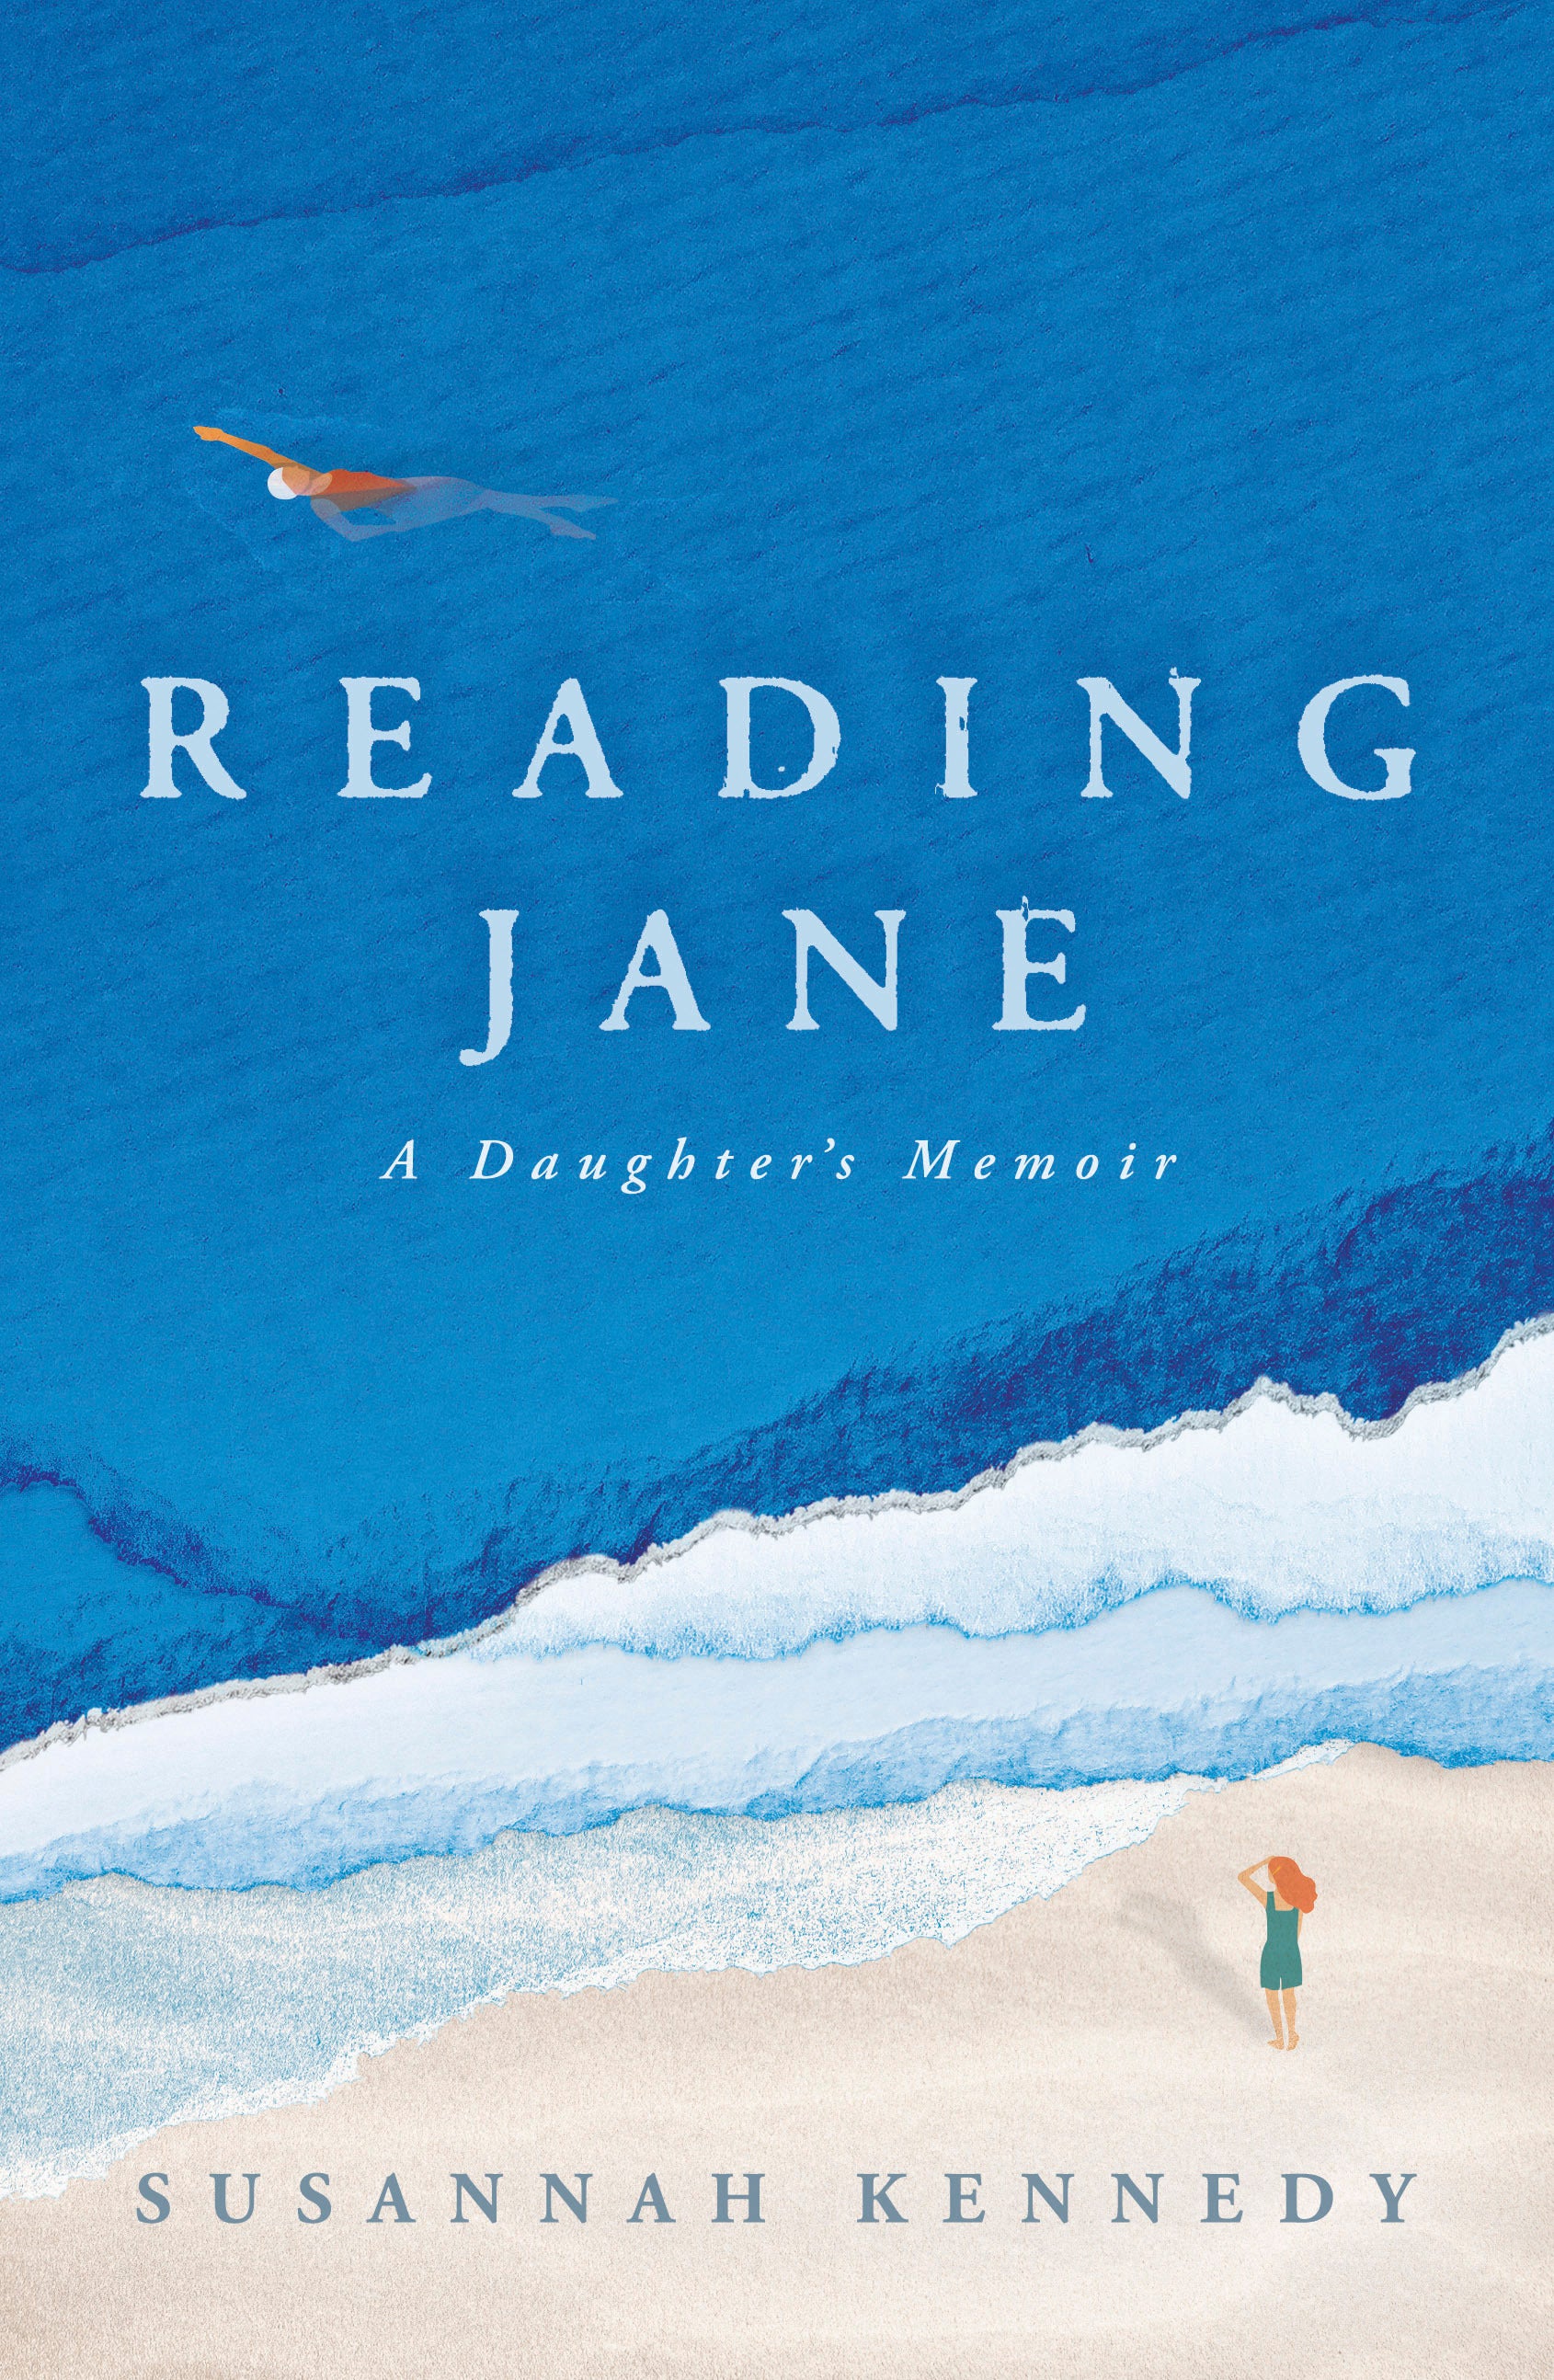 Book Review - Reading Jane